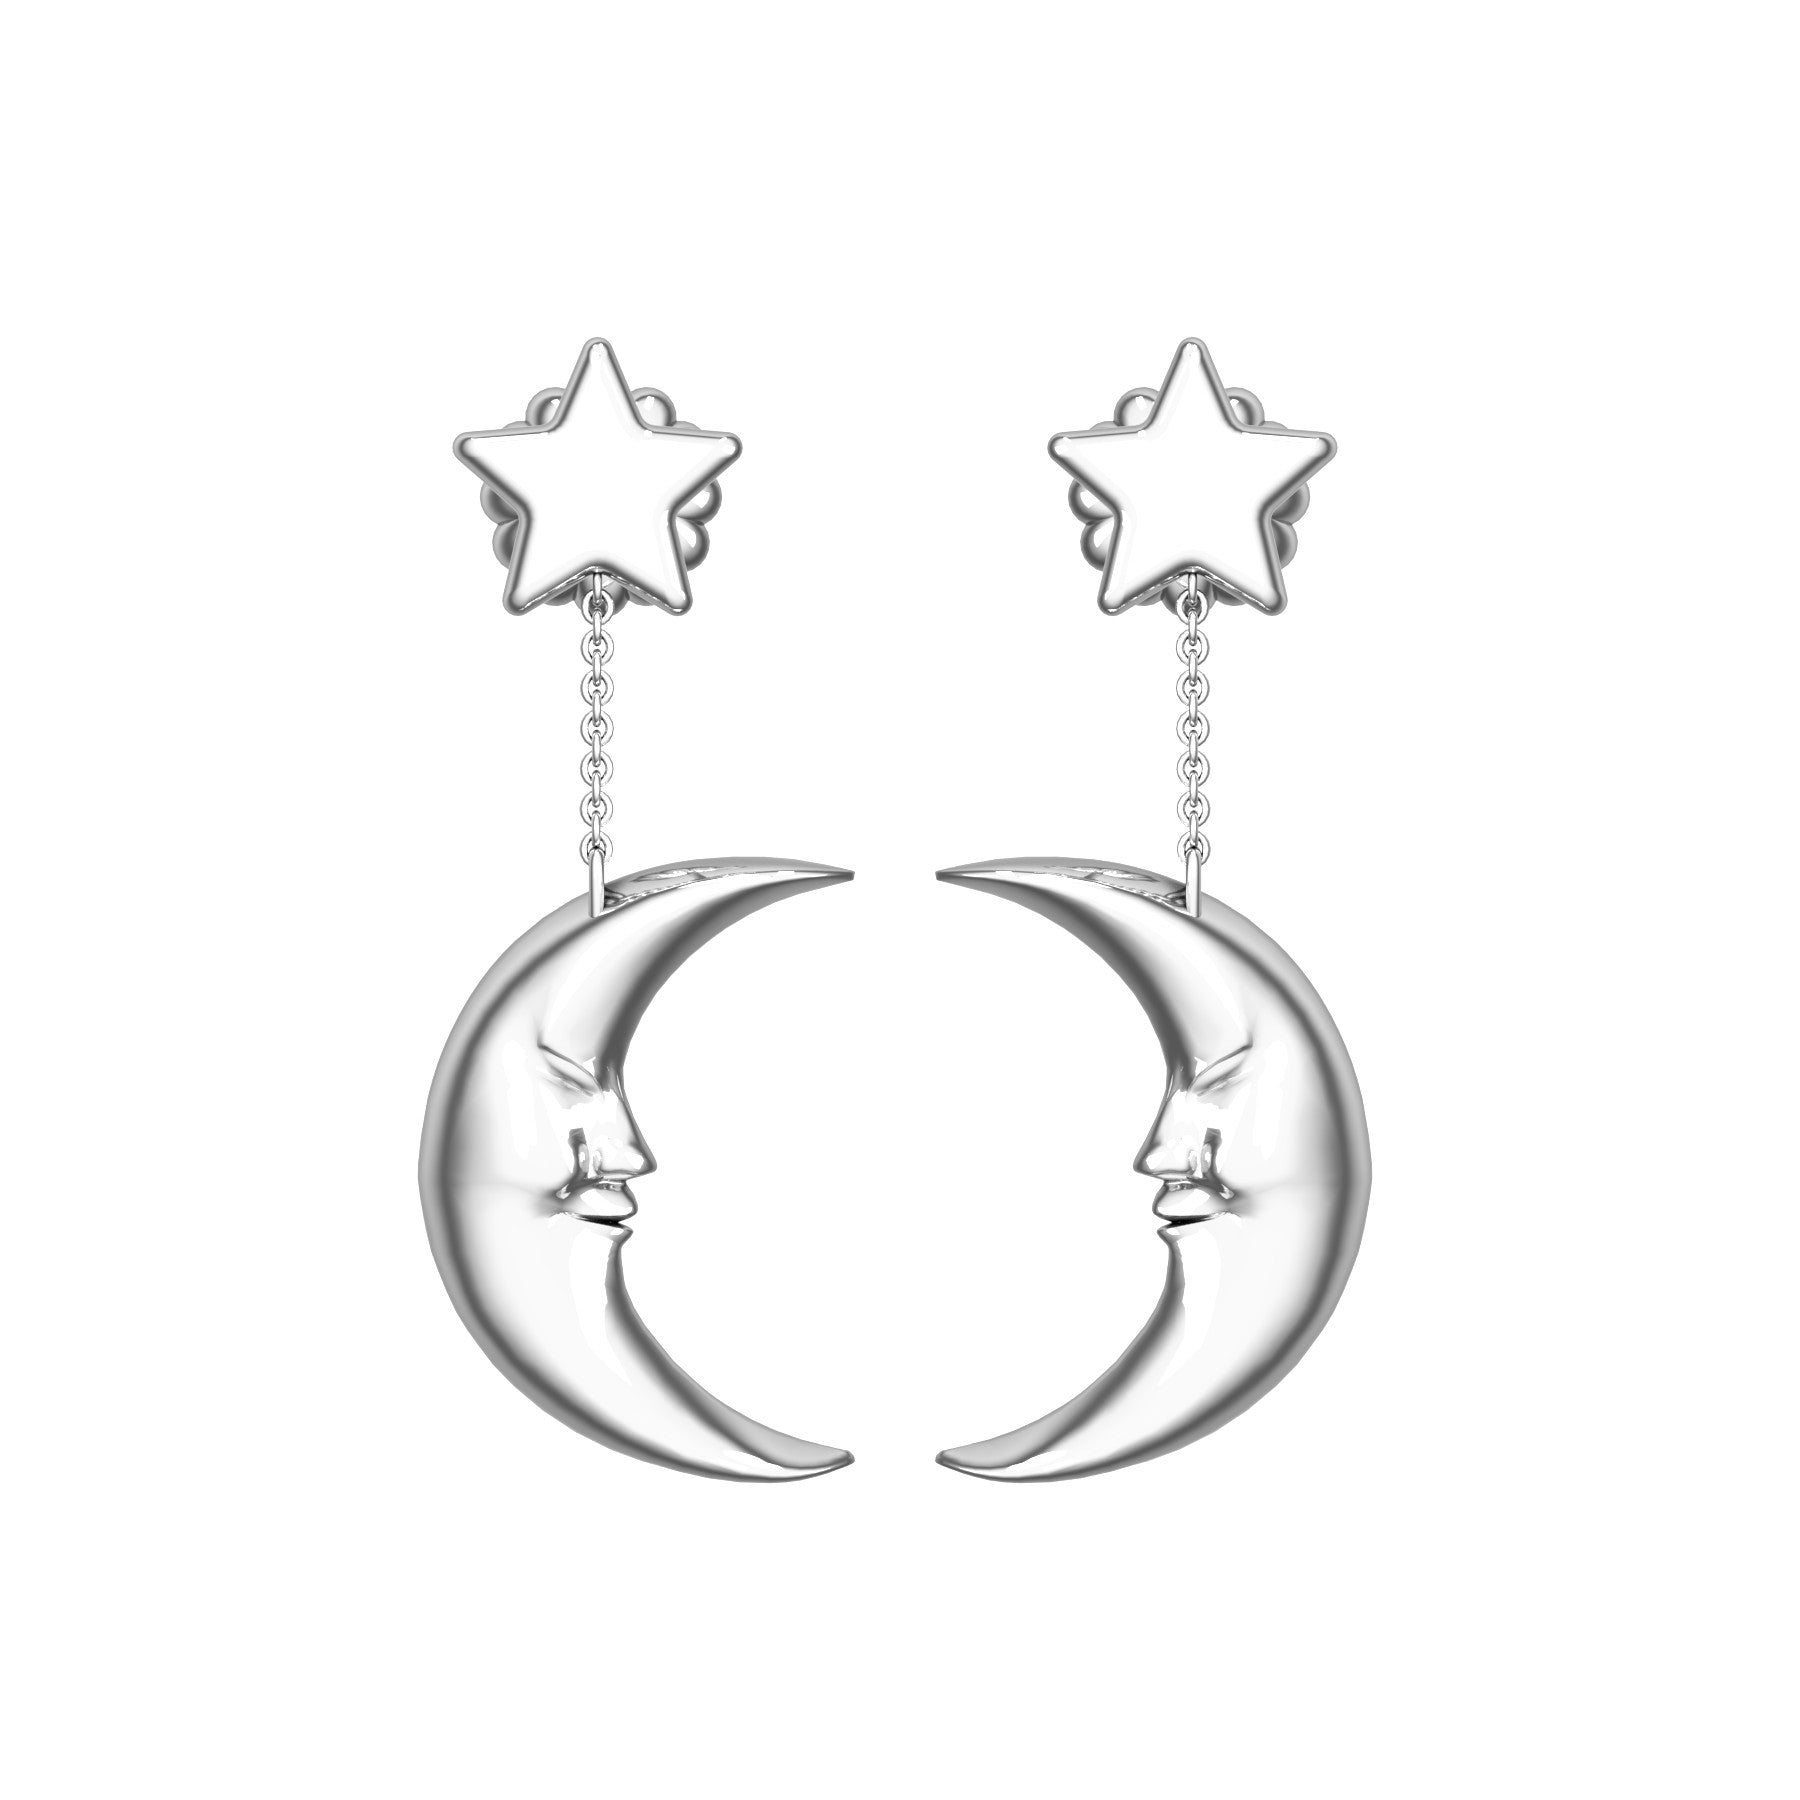 moon earrings, sterling silver, weight about 7,8 g (0.13 oz), length 36,5 mm